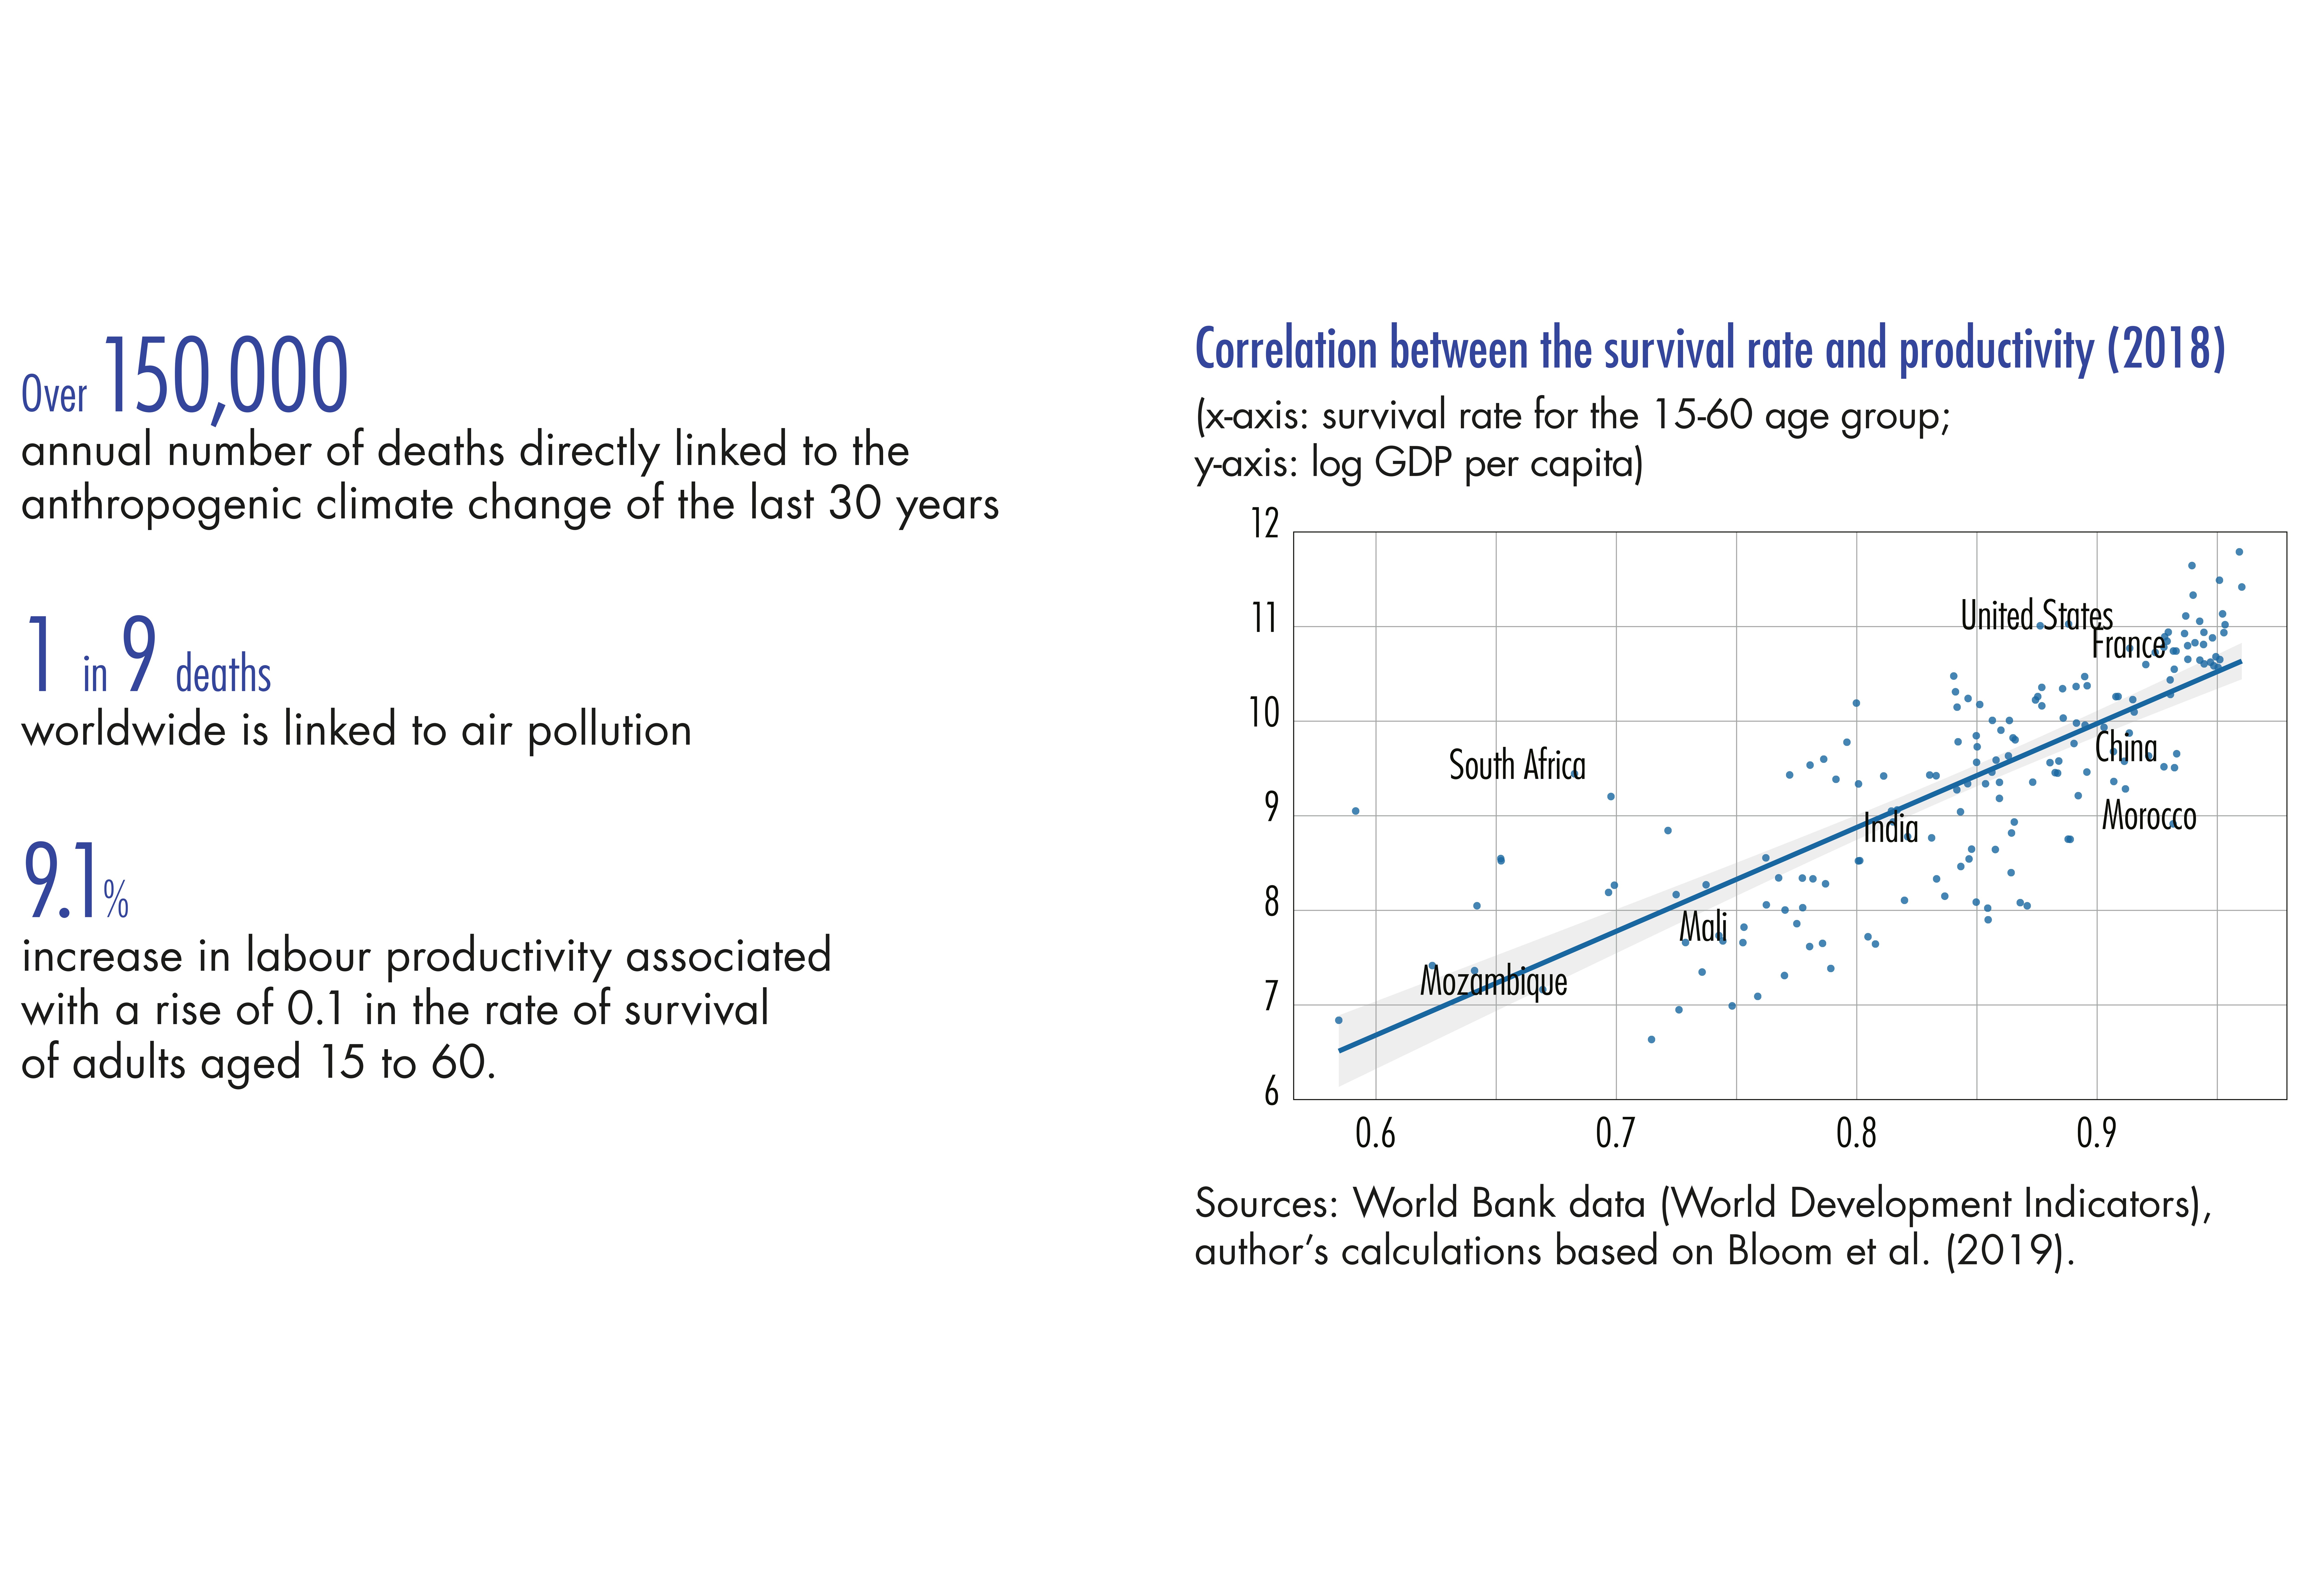 chart: correlation between survival rate and productivity for the countries in 2018